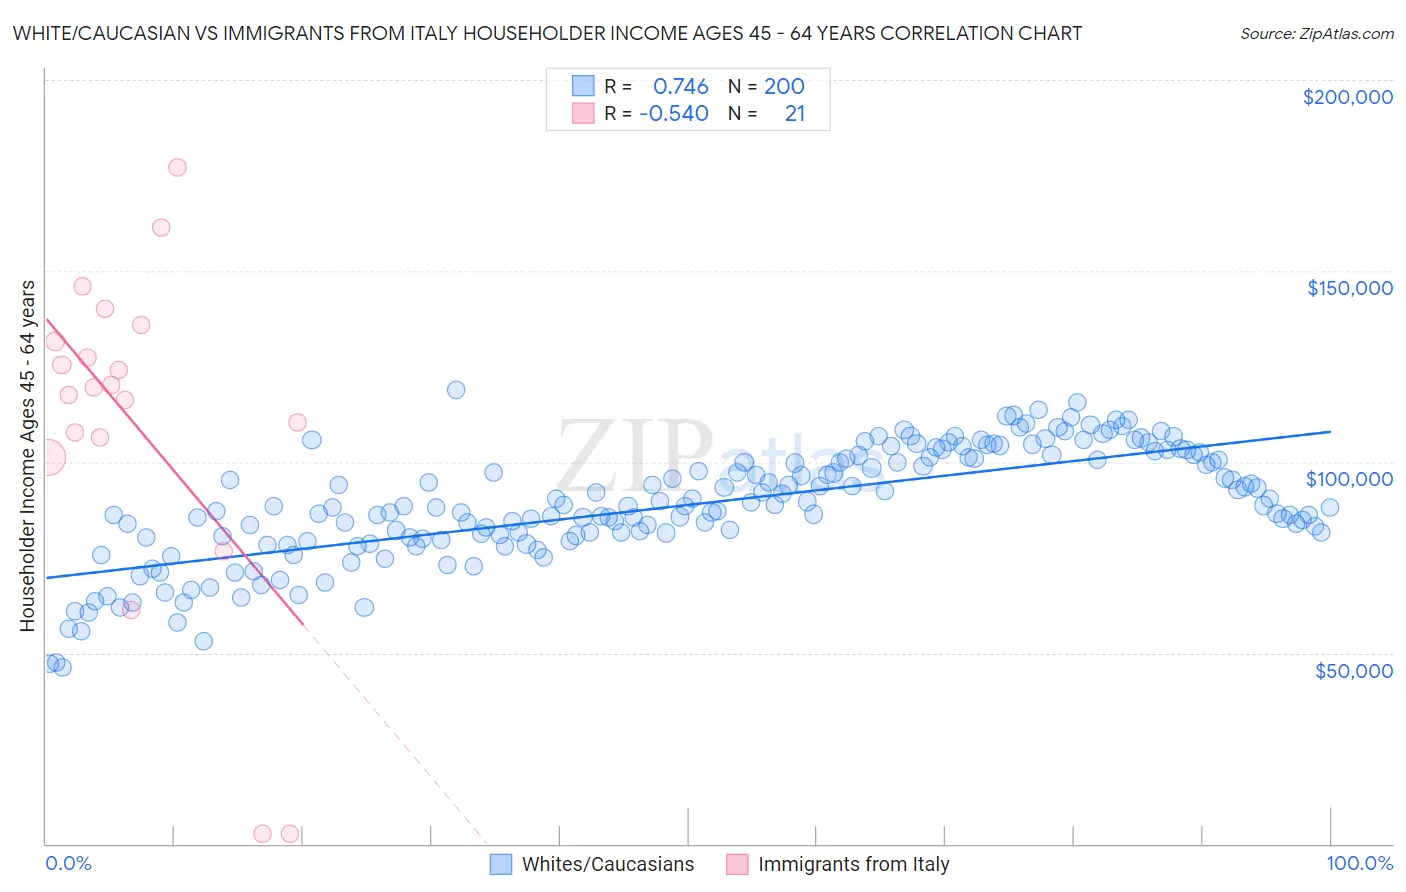 White/Caucasian vs Immigrants from Italy Householder Income Ages 45 - 64 years